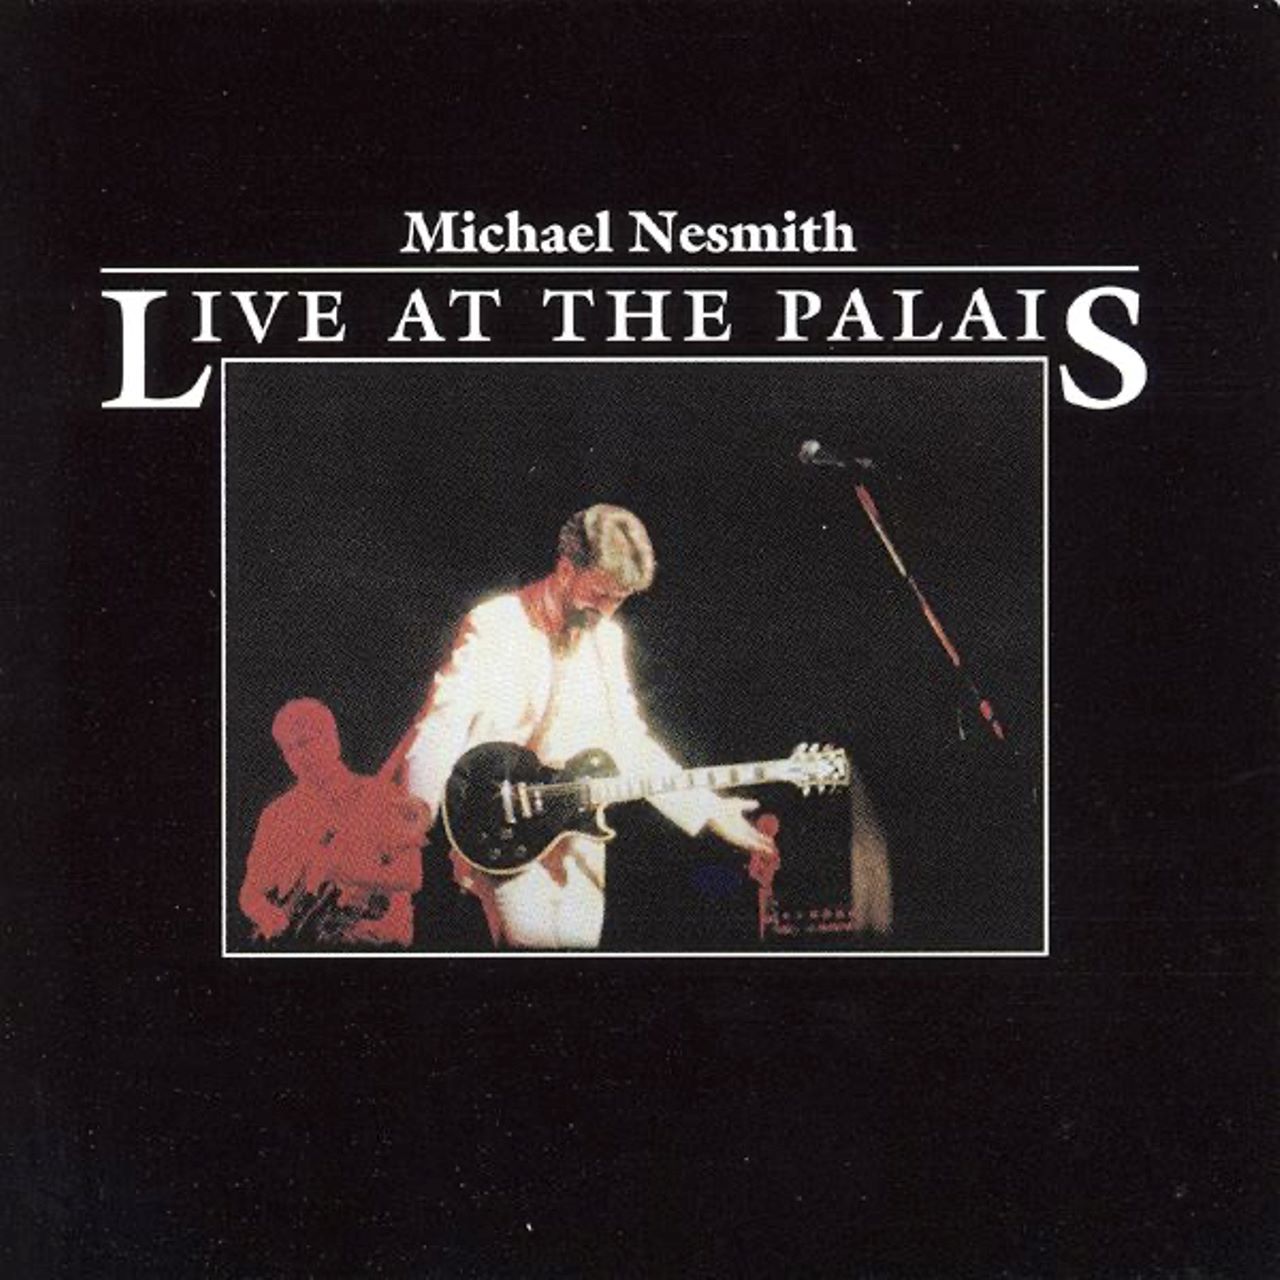 Michael Nesmith - Live At The Palais cover disco